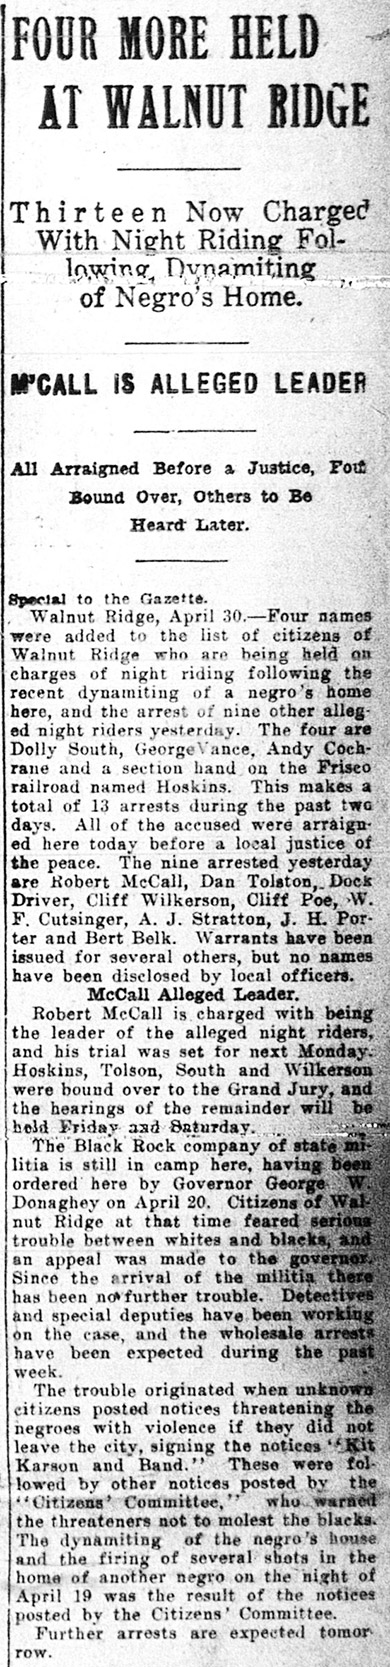 "Four more held at walnut ridge" newspaper clipping